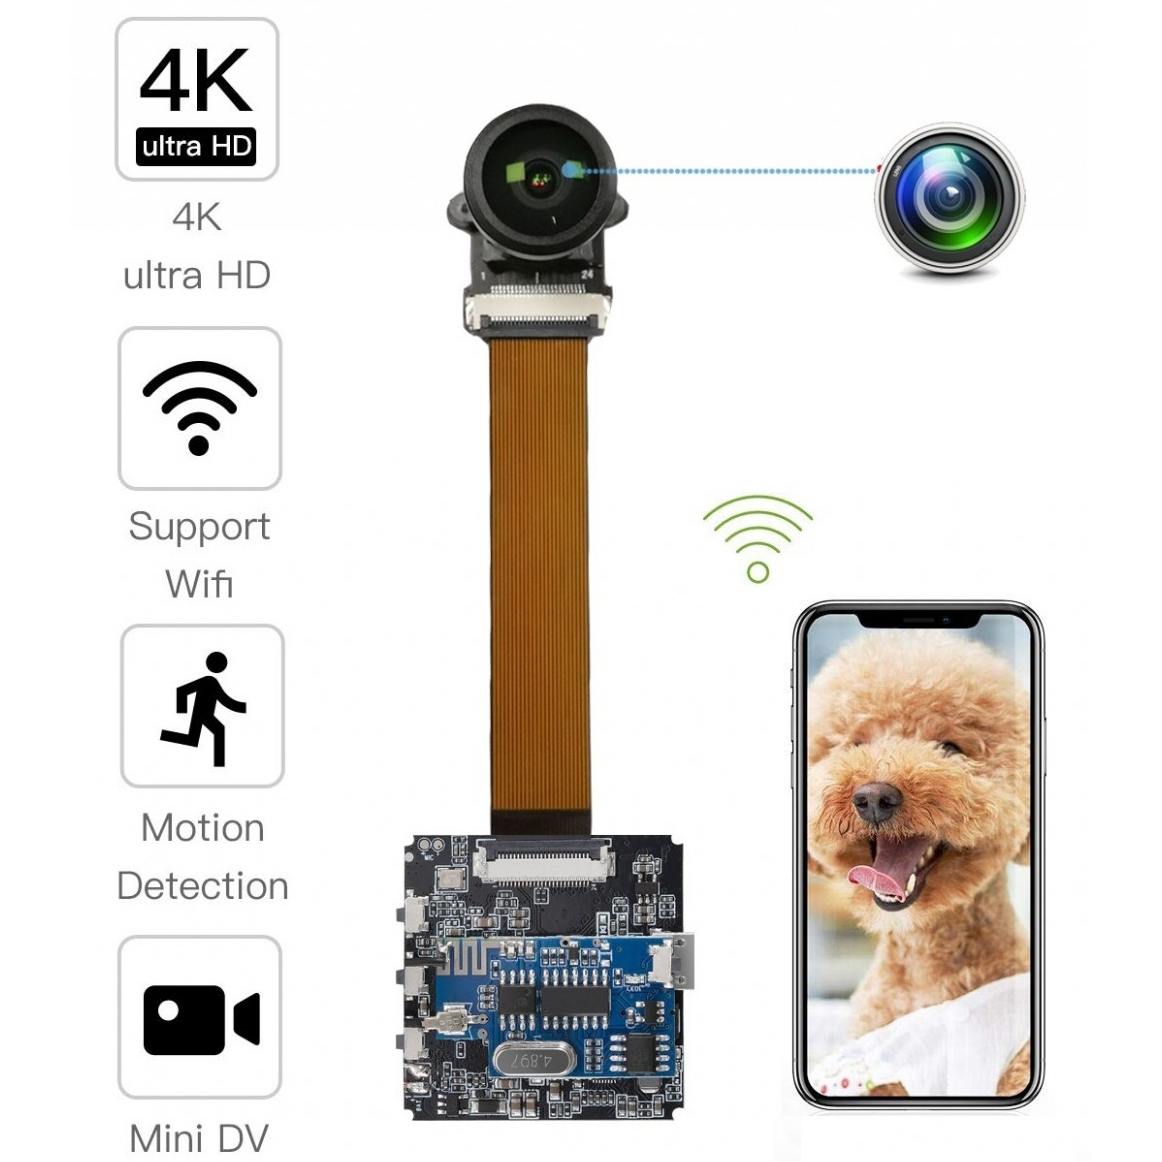 Chinese ProfessionalSPY HIDDEN CAMERAS WIRELESS-
 4K Real Ultra HD DIY Wireless Camera Big Wide Angle 6CM Mini DVR Motion Detection Nanny Cam Security System APP Control Action Camera up to 400GB – MATECAM